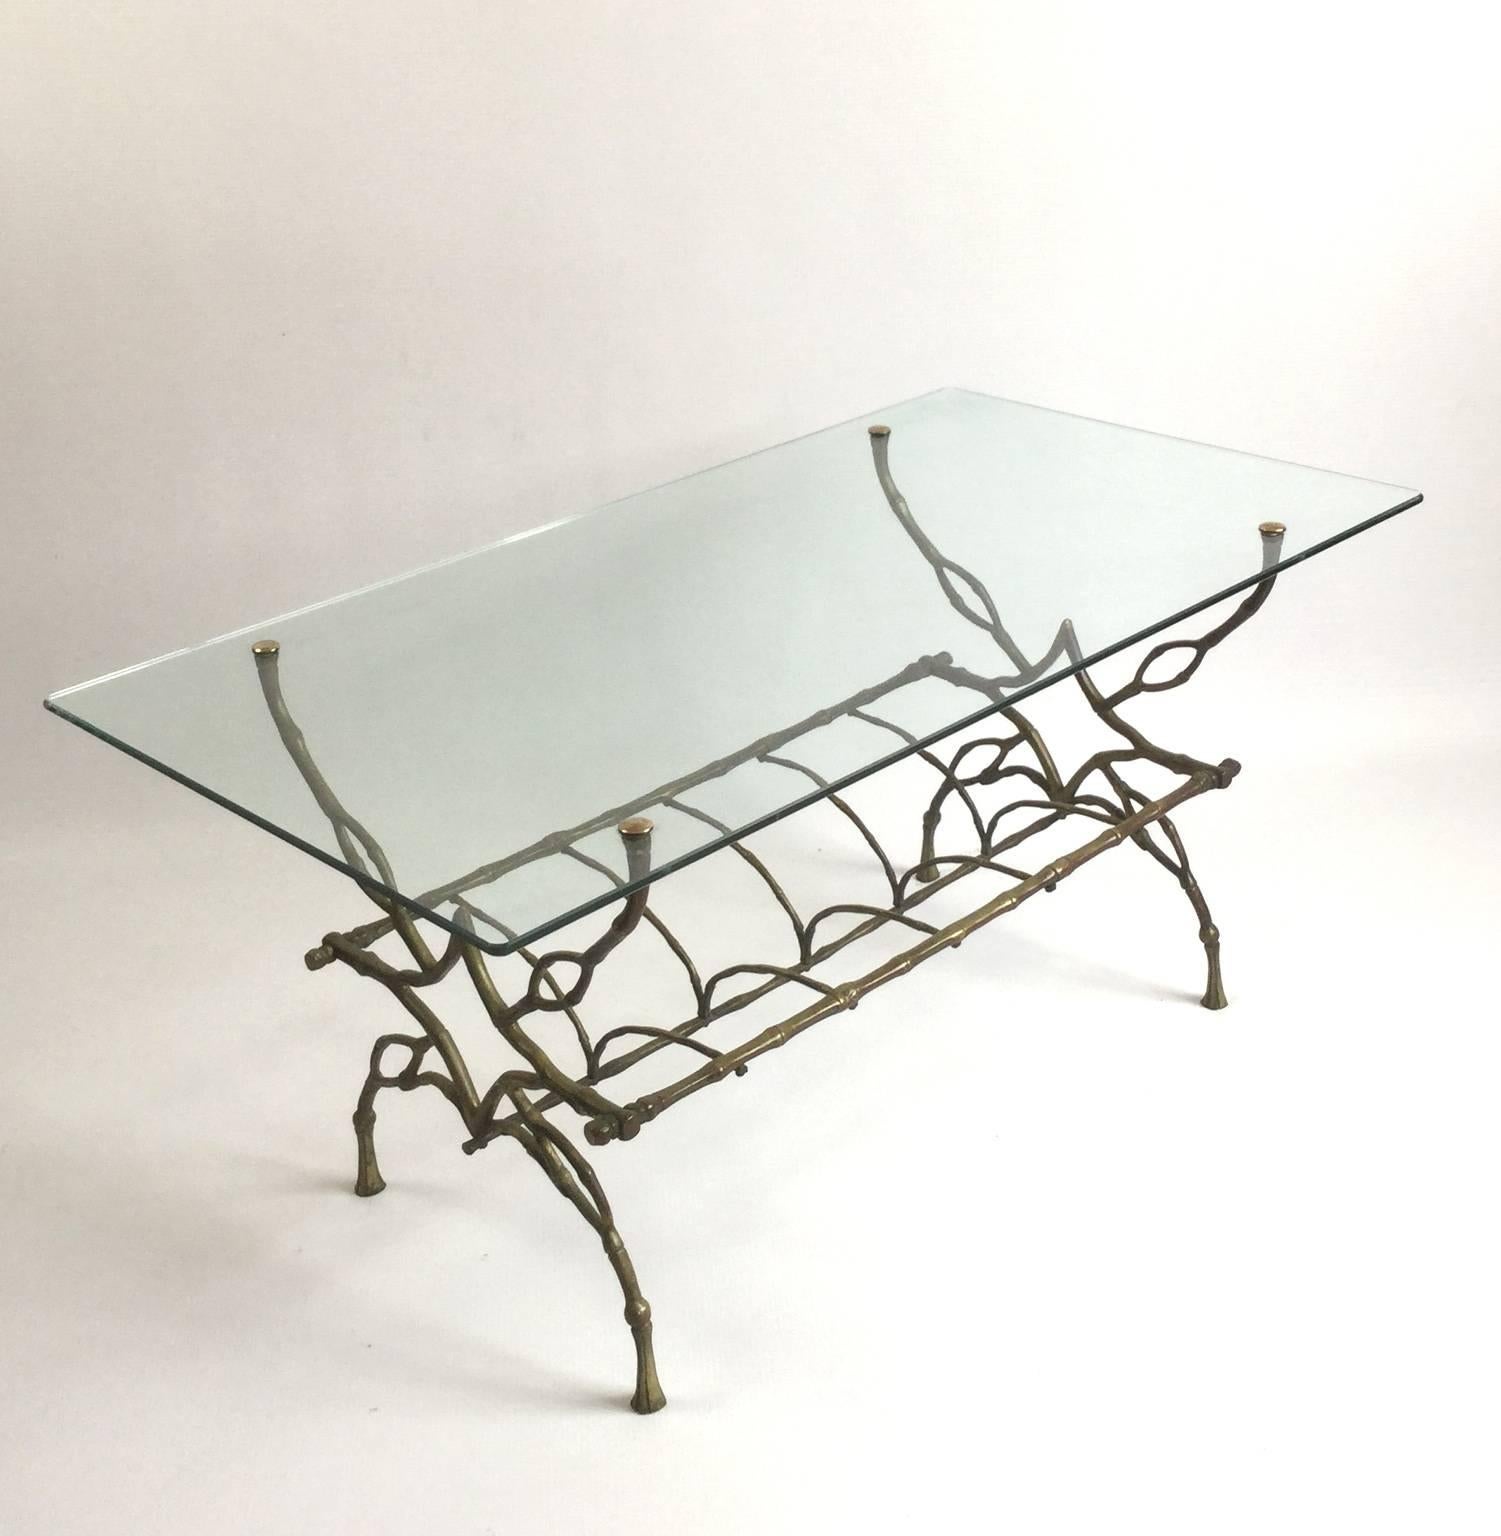 Amazing good quality faux bamboo bronze coffee table with a spine skeleton shape.
Rectangular glass top and bronze newspaper holder.
In the style of Maison Jansen or Maison Baguès.